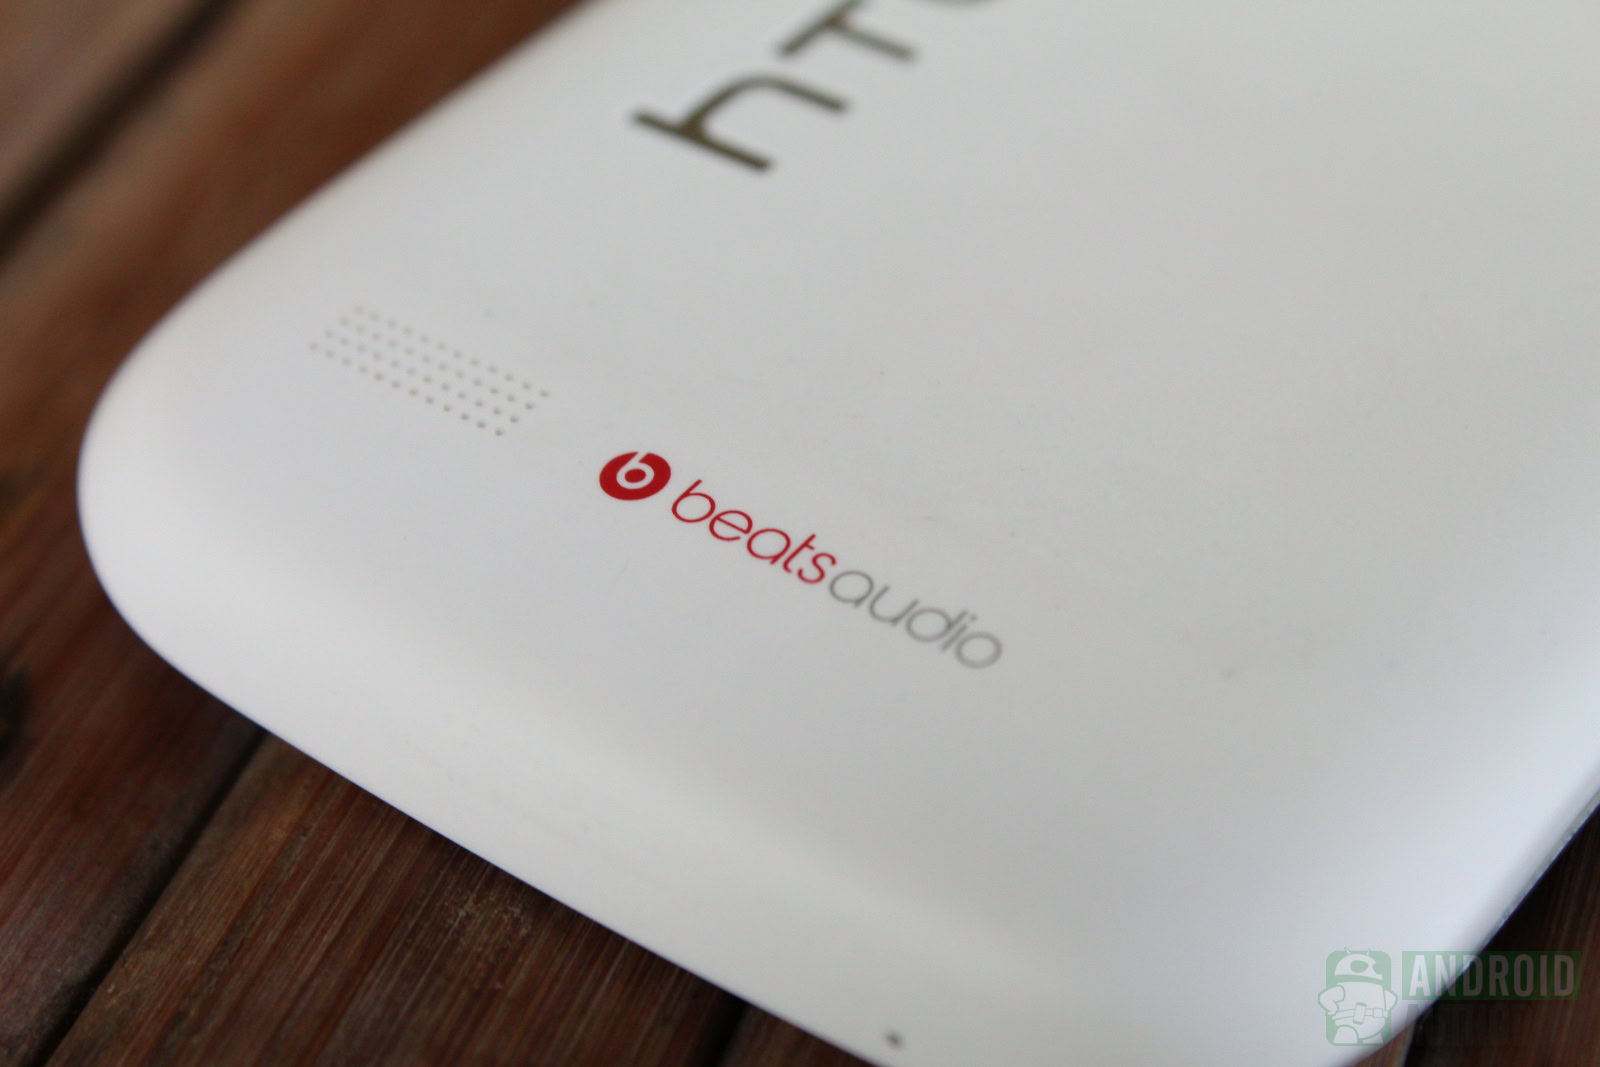 tømmerflåde Erhvervelse Lignende Did you know: HTCowned Beats before Apple - Android Authority